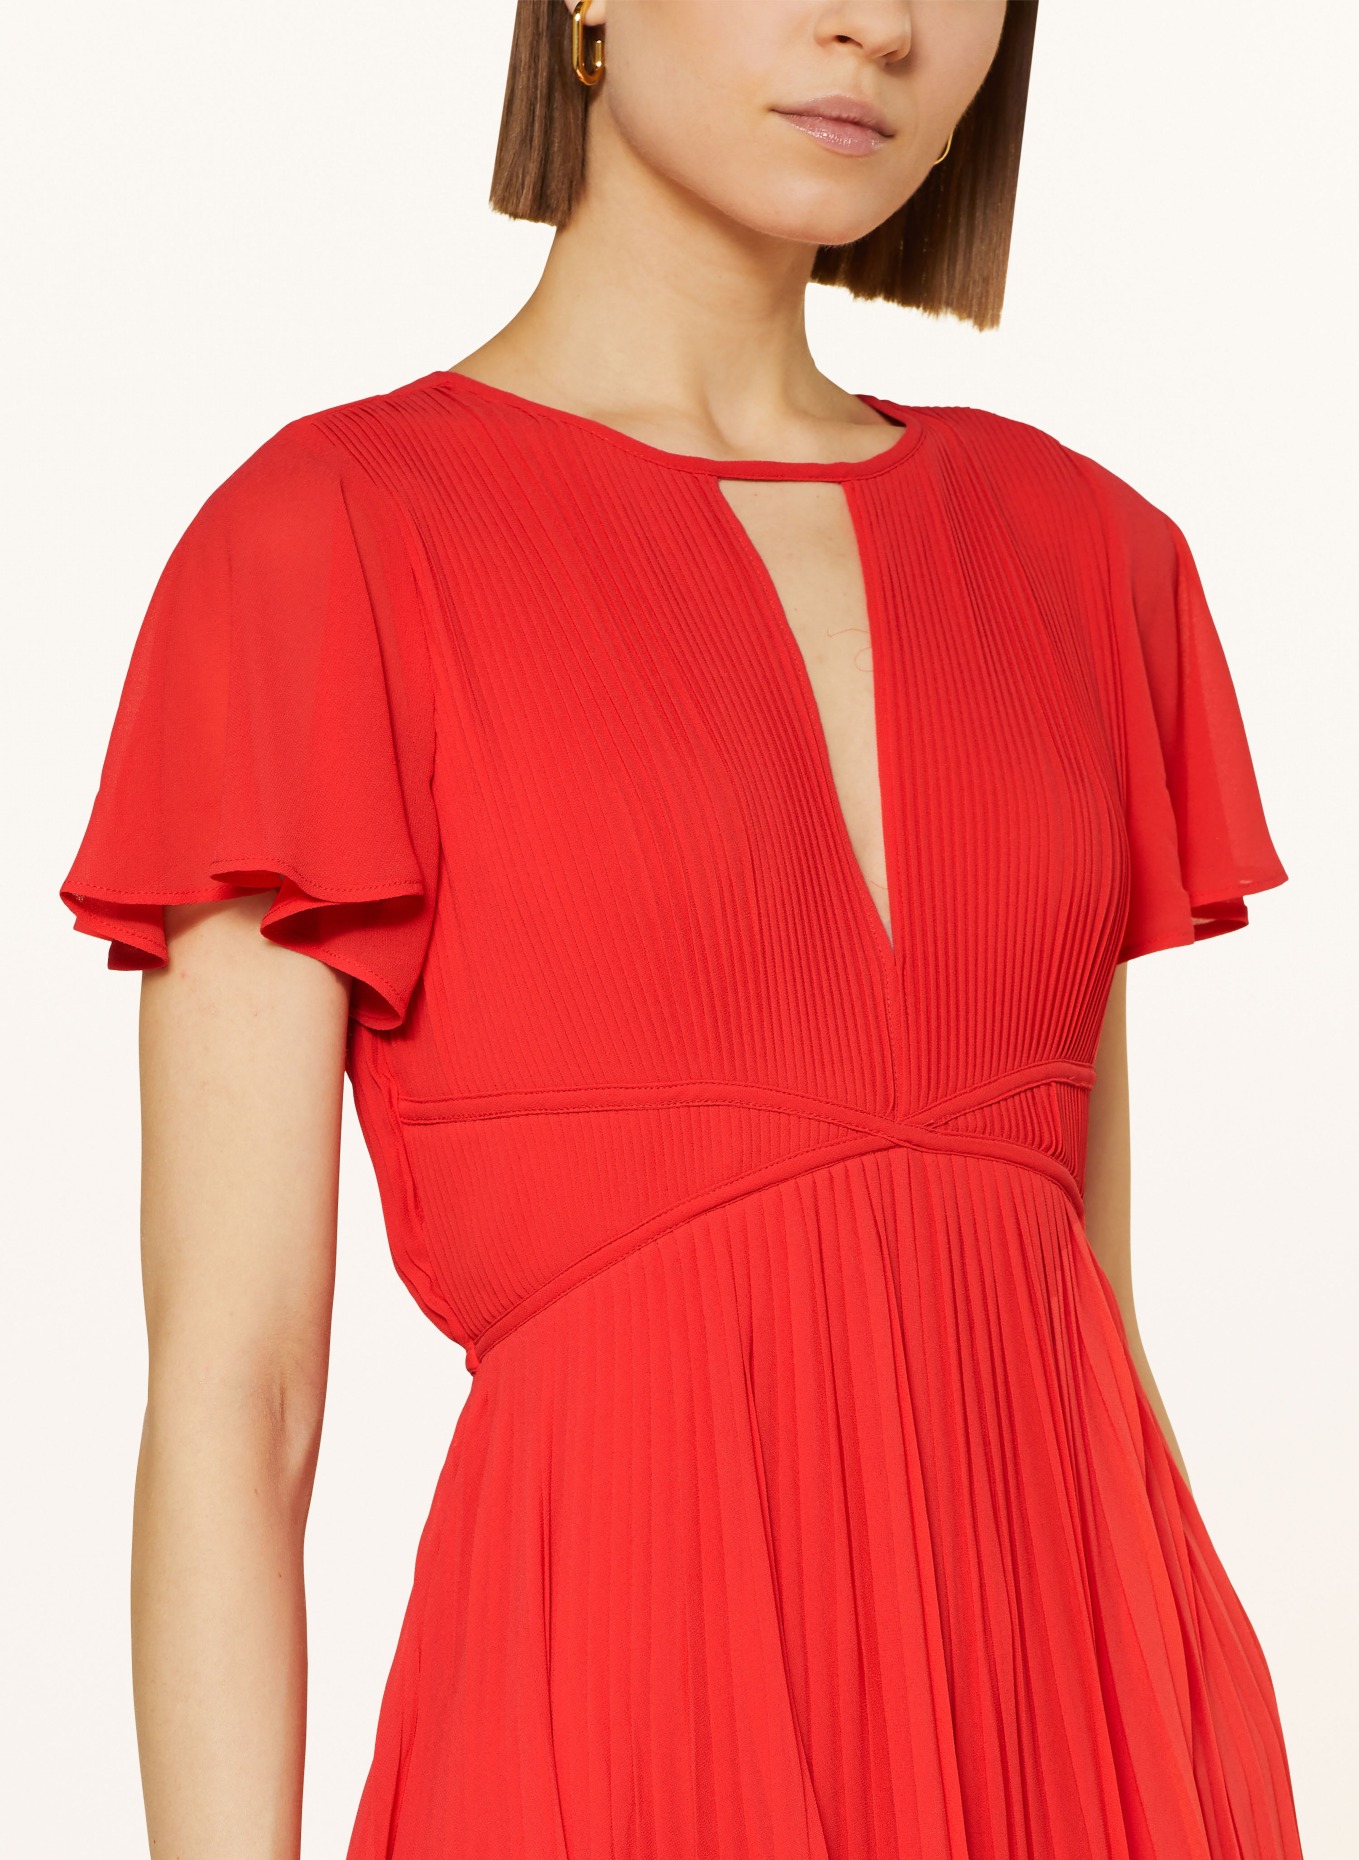 MICHAEL KORS Pleated dress, Color: RED (Image 4)